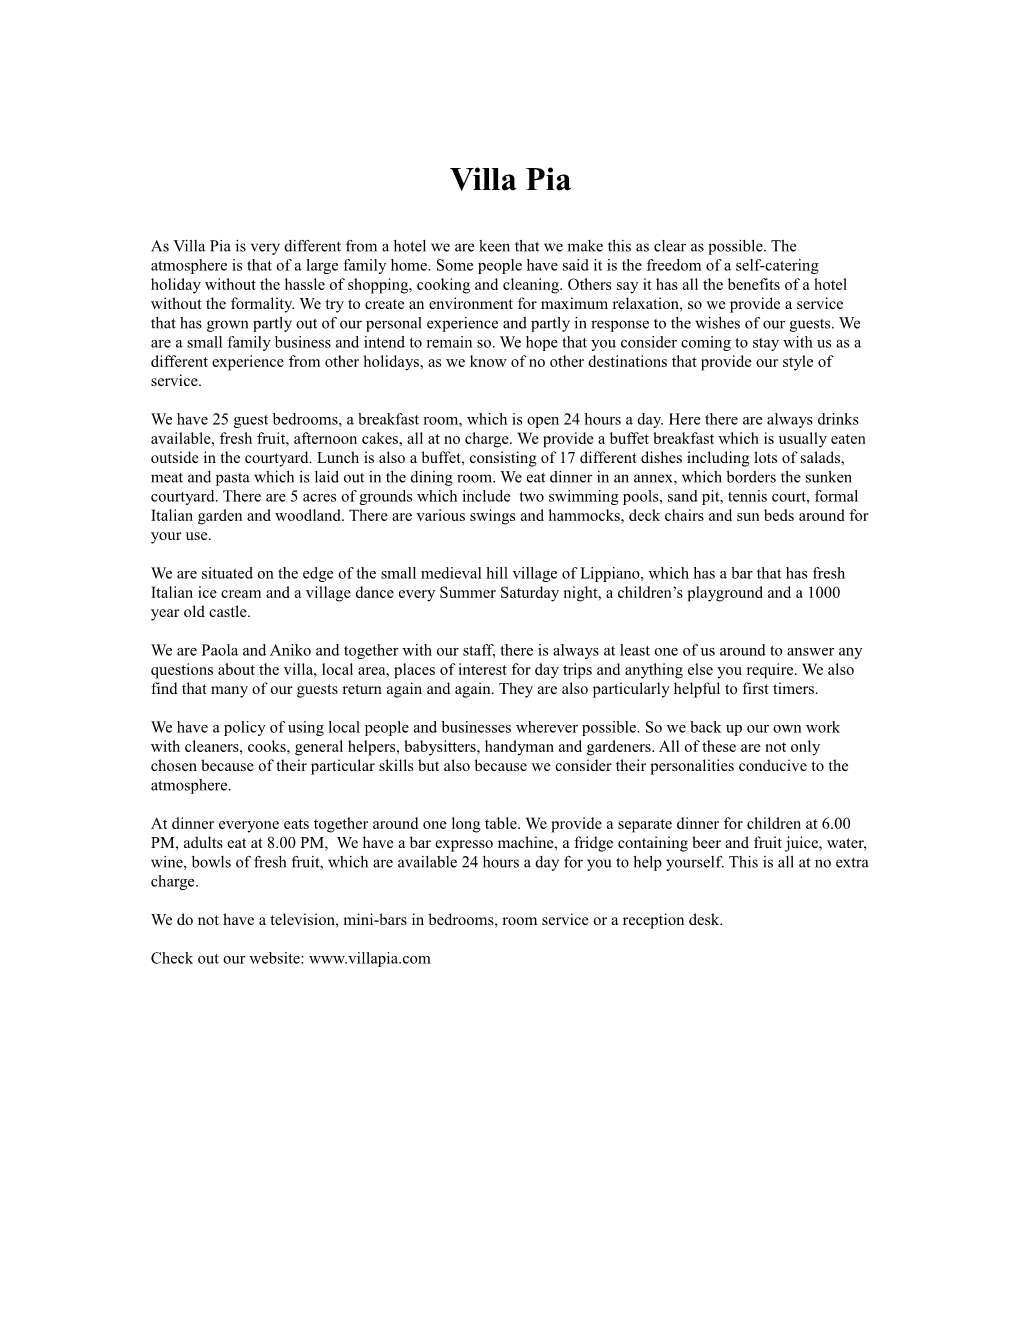 As Villa Pia Is Very Different from a Hotel We Are Keen That We Make This As Clear As Possible